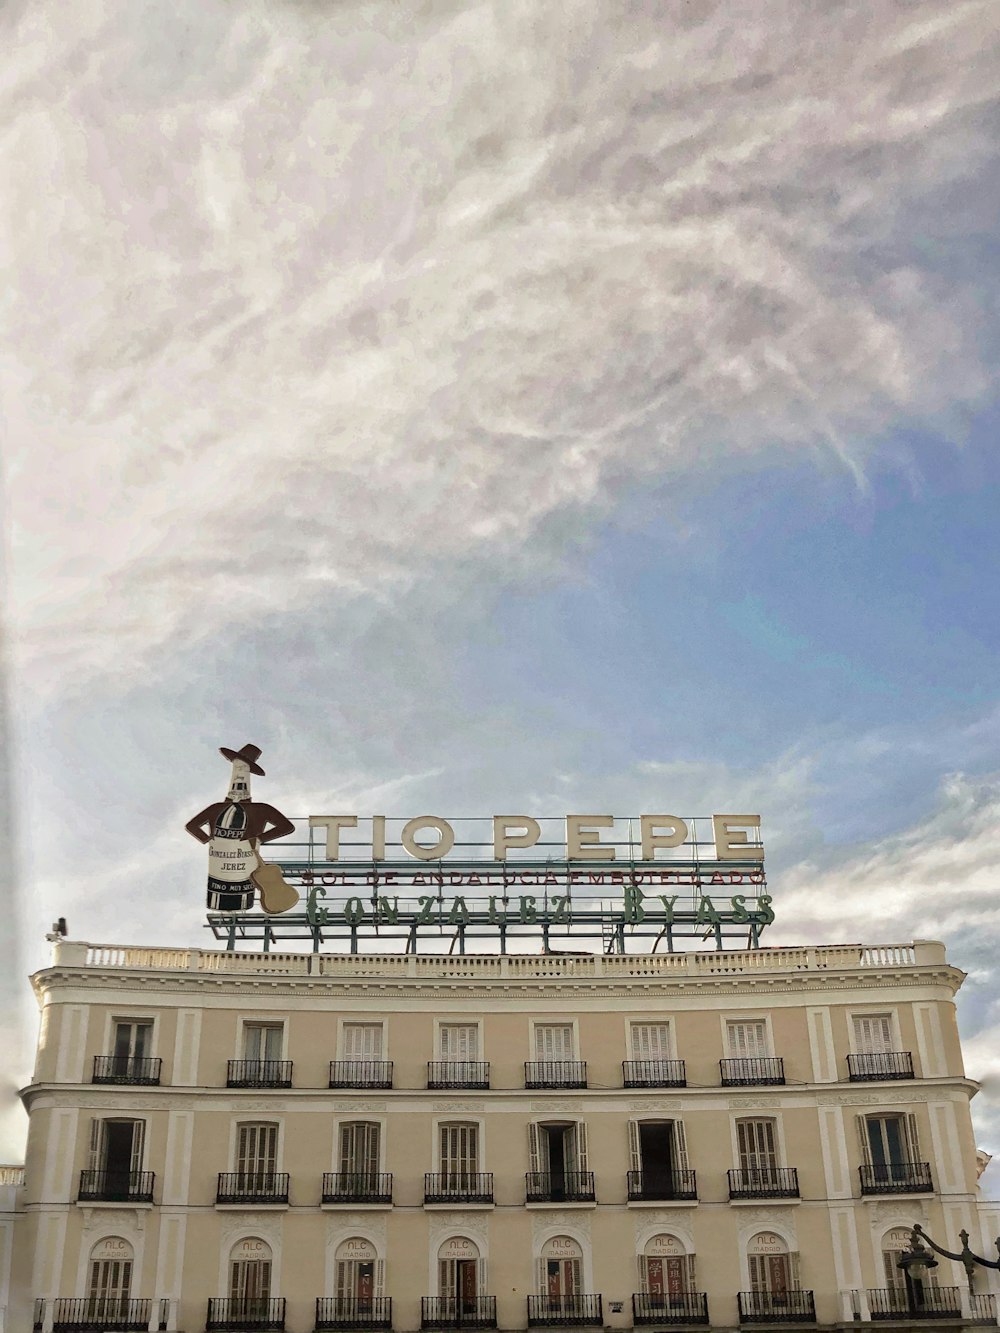 Tio Pepe building during daytime